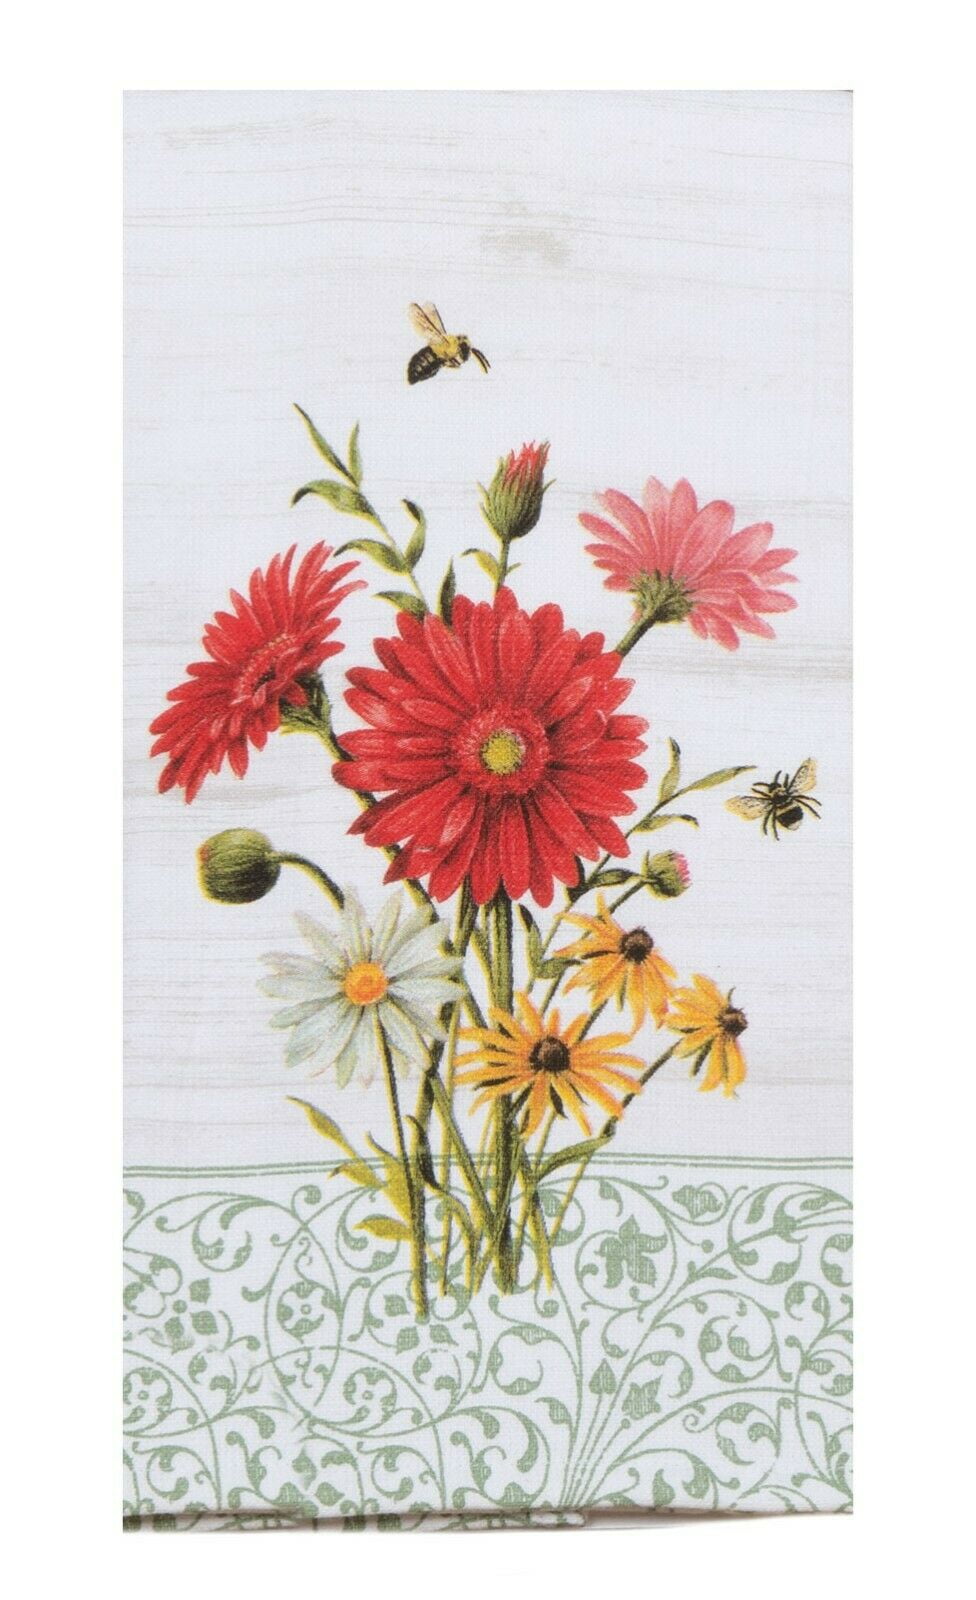 Set of 2 BEE INSPIRED Honey Bee Terry Kitchen Towels by Kay Dee Designs